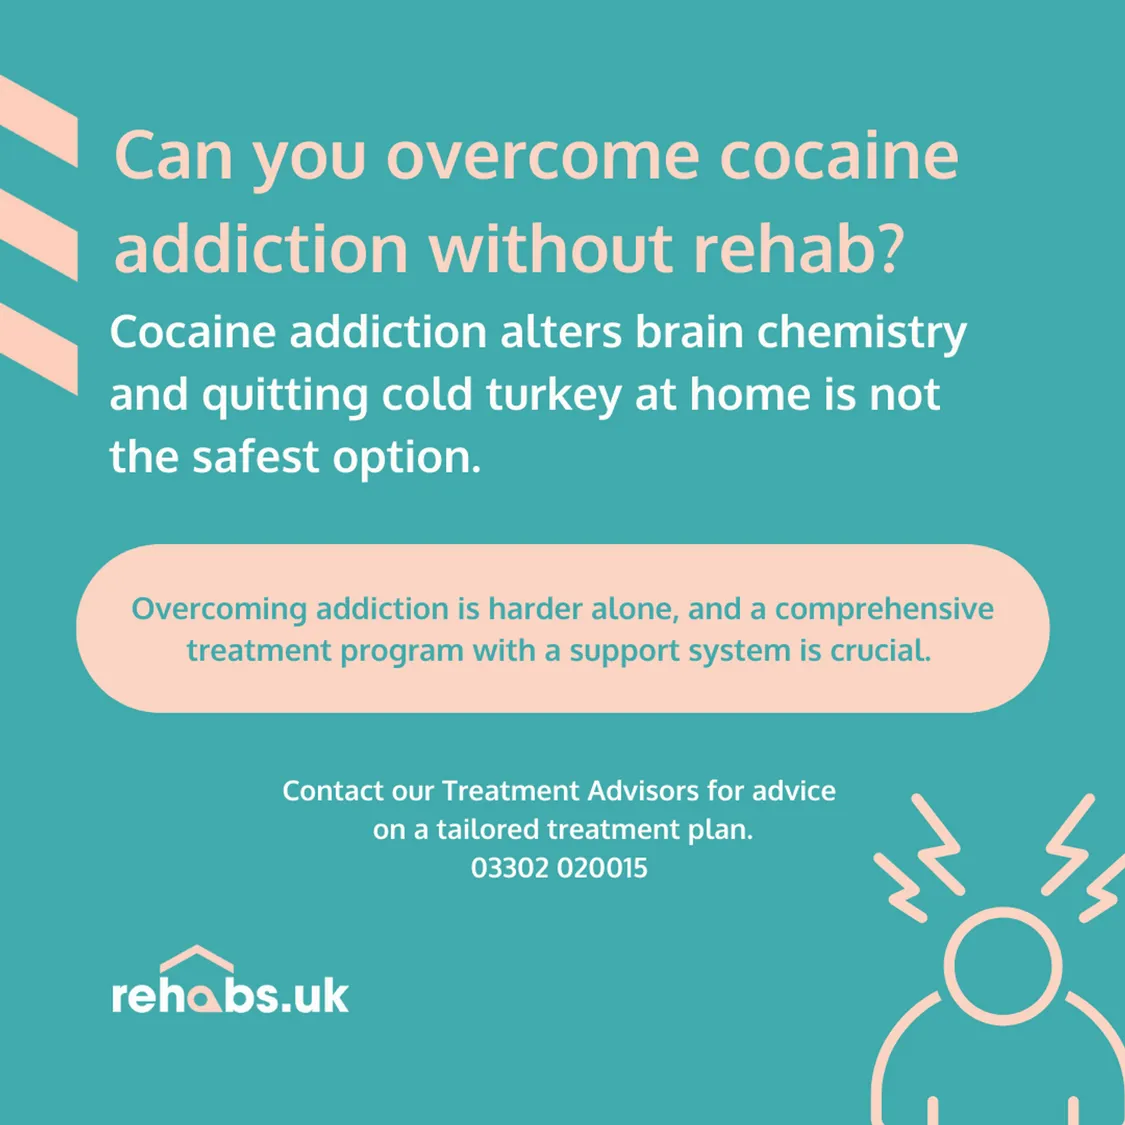 Regular cocaine use alters brain chemistry and impairs clear thinking. Withdrawal symptoms may be mild, but psychological addiction can be tough to overcome.  Cocaine addiction accelerates body functions, leading to a drop in emotions, energy, and focus during recovery.  Overcoming addiction alone is challenging, but a comprehensive treatment programme and a strong support system can increase chances of success. Friends, family, healthcare providers, and support groups can be part of this system.  ☎️ Contact our Treatment Advisors for guidance and advice on the right treatment plan tailored to your personal situation 03302 020015